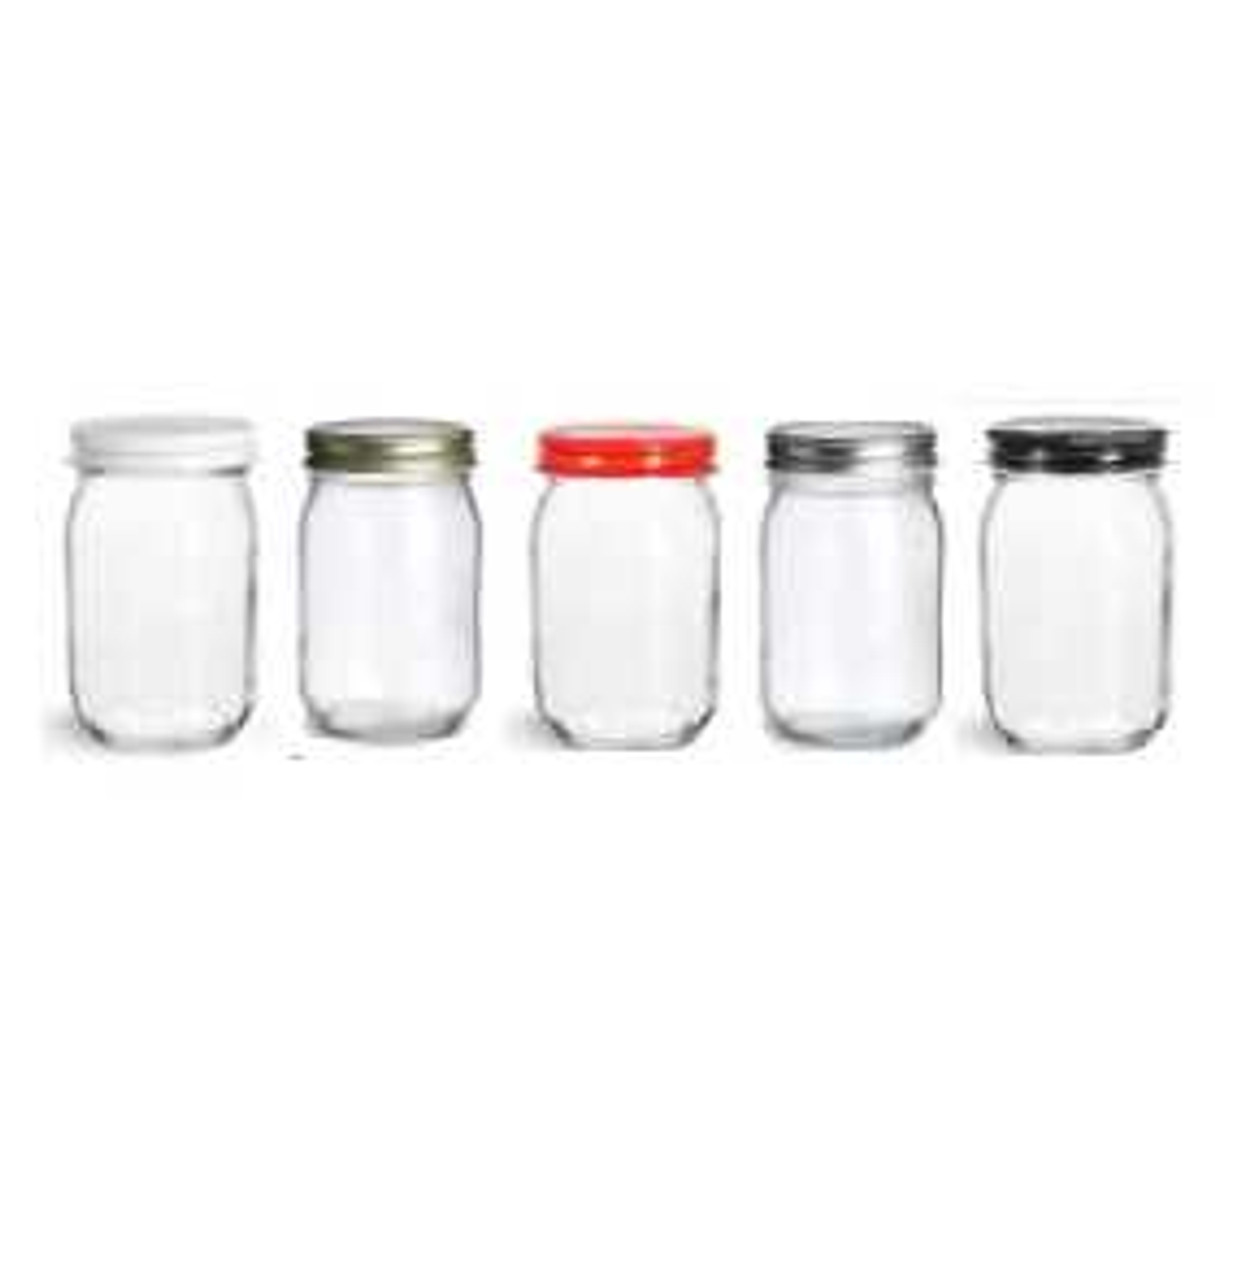 https://cdn11.bigcommerce.com/s-1ybtx/images/stencil/1280x1280/products/842/6037/16-oz-Mason-Glass-Jar-with-your-choice-of-lid-Pint-Made-In-USA_3070__54405.1674334350.jpg?c=2?imbypass=on